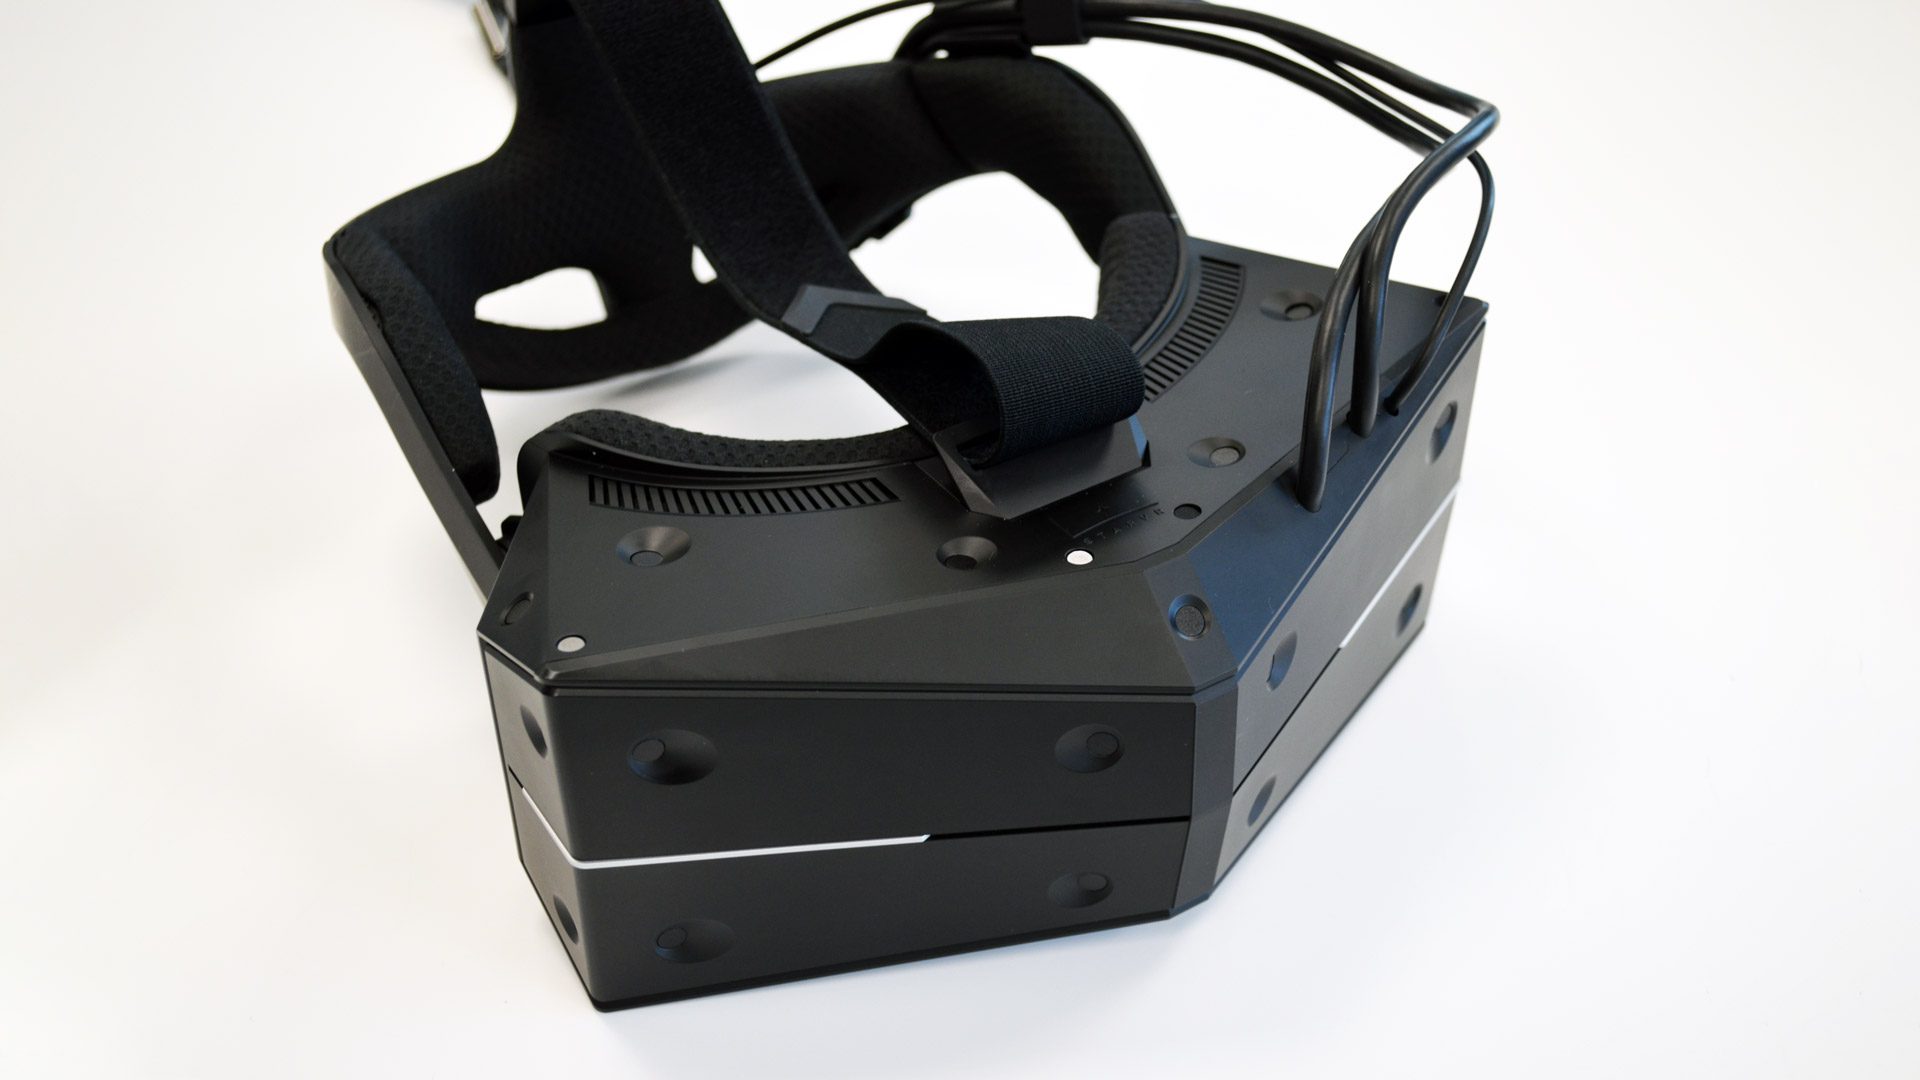 StarVR One is the Most Complete Ultra-wide VR Headset to Date